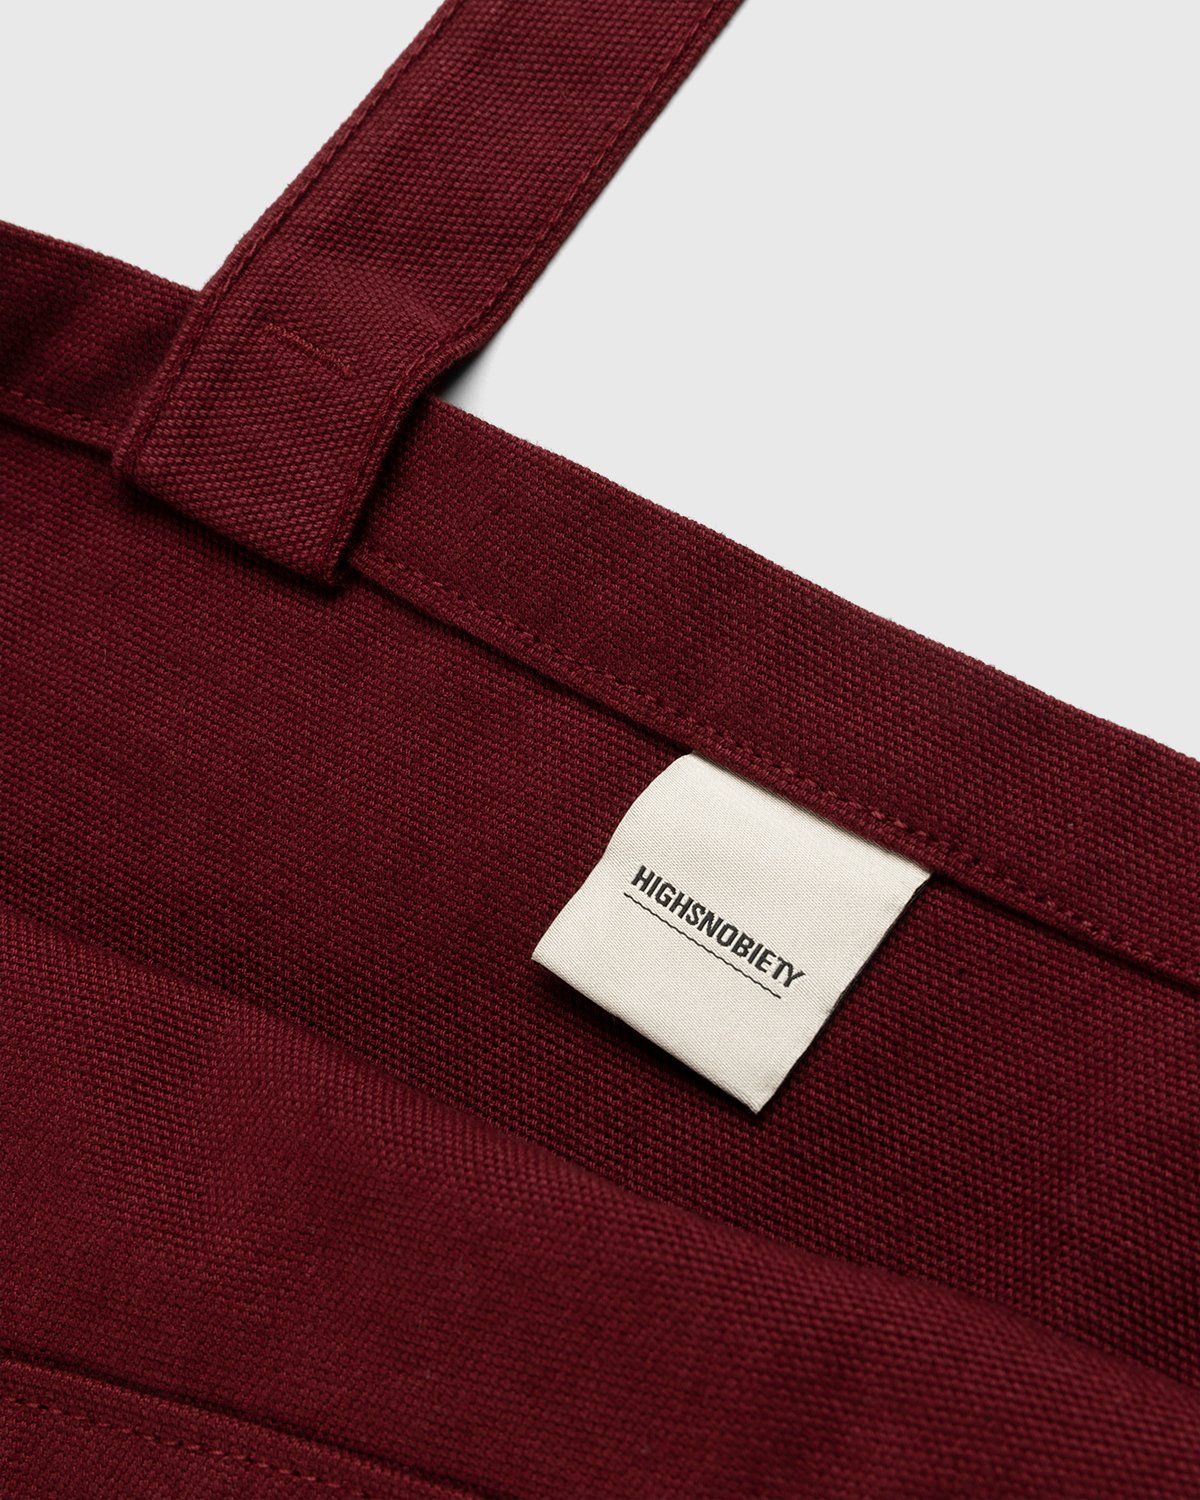 Highsnobiety – HS Sports Logo Tote Bag Bordeaux - Bags - Red - Image 3